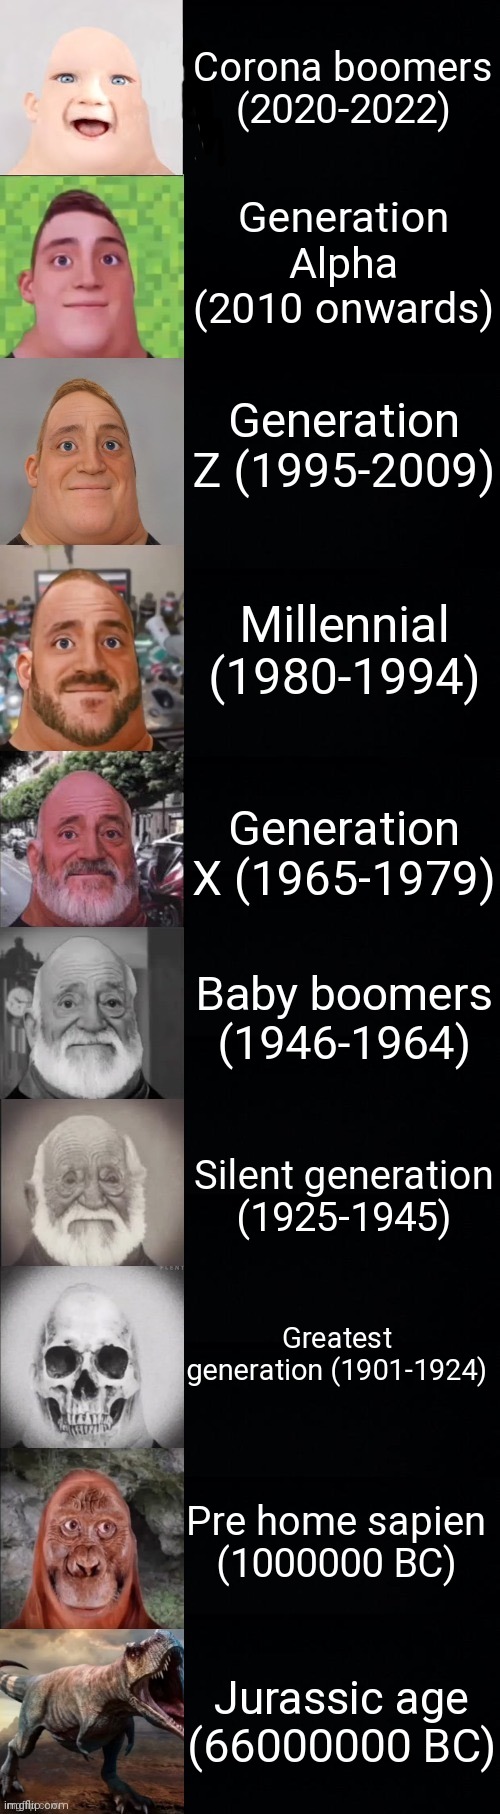 All the generations possible | Corona boomers (2020-2022); Generation Alpha (2010 onwards); Generation Z (1995-2009); Millennial (1980-1994); Generation X (1965-1979); Baby boomers (1946-1964); Silent generation (1925-1945); Greatest generation (1901-1924); Pre home sapien (1000000 BC); Jurassic age (66000000 BC) | image tagged in mr incredible becoming old,generation | made w/ Imgflip meme maker